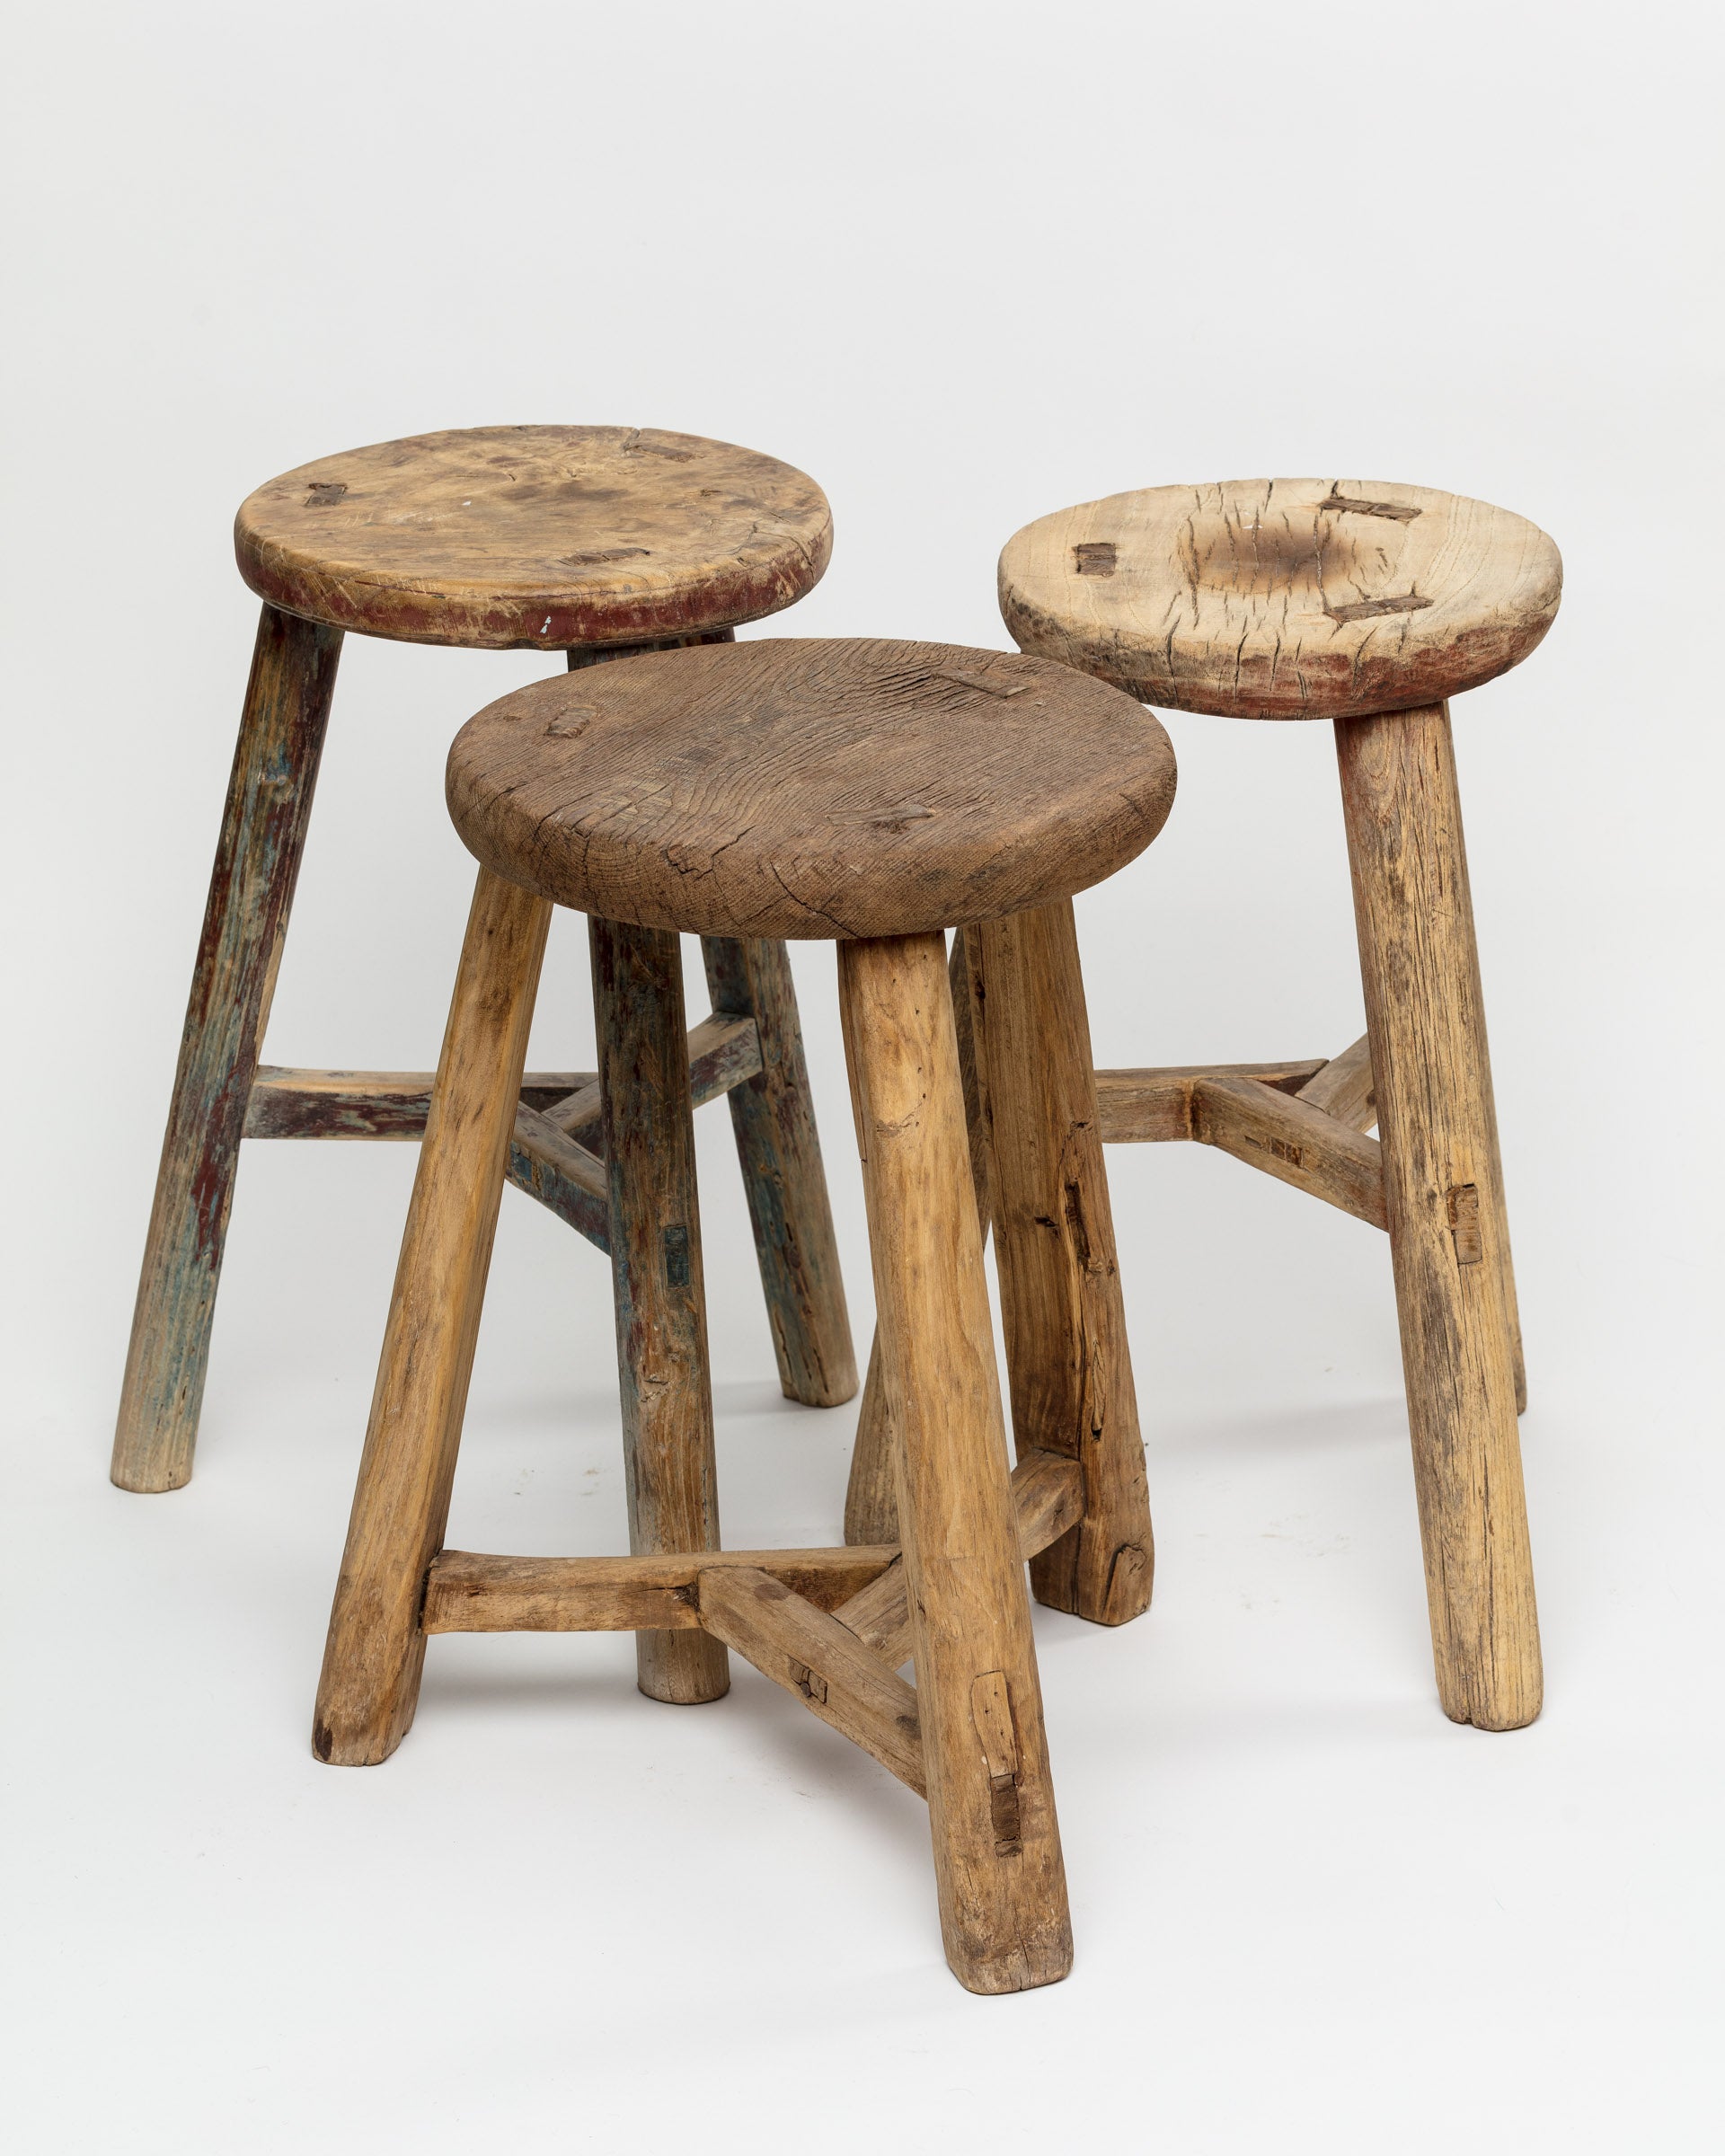 Three ROUND STOOL 48 from Indus Design Imports with varying heights and weathered textures against a white background. Each stool from a Scottsdale Arizona bungalow features unique paint remnants and natural wood patterns.